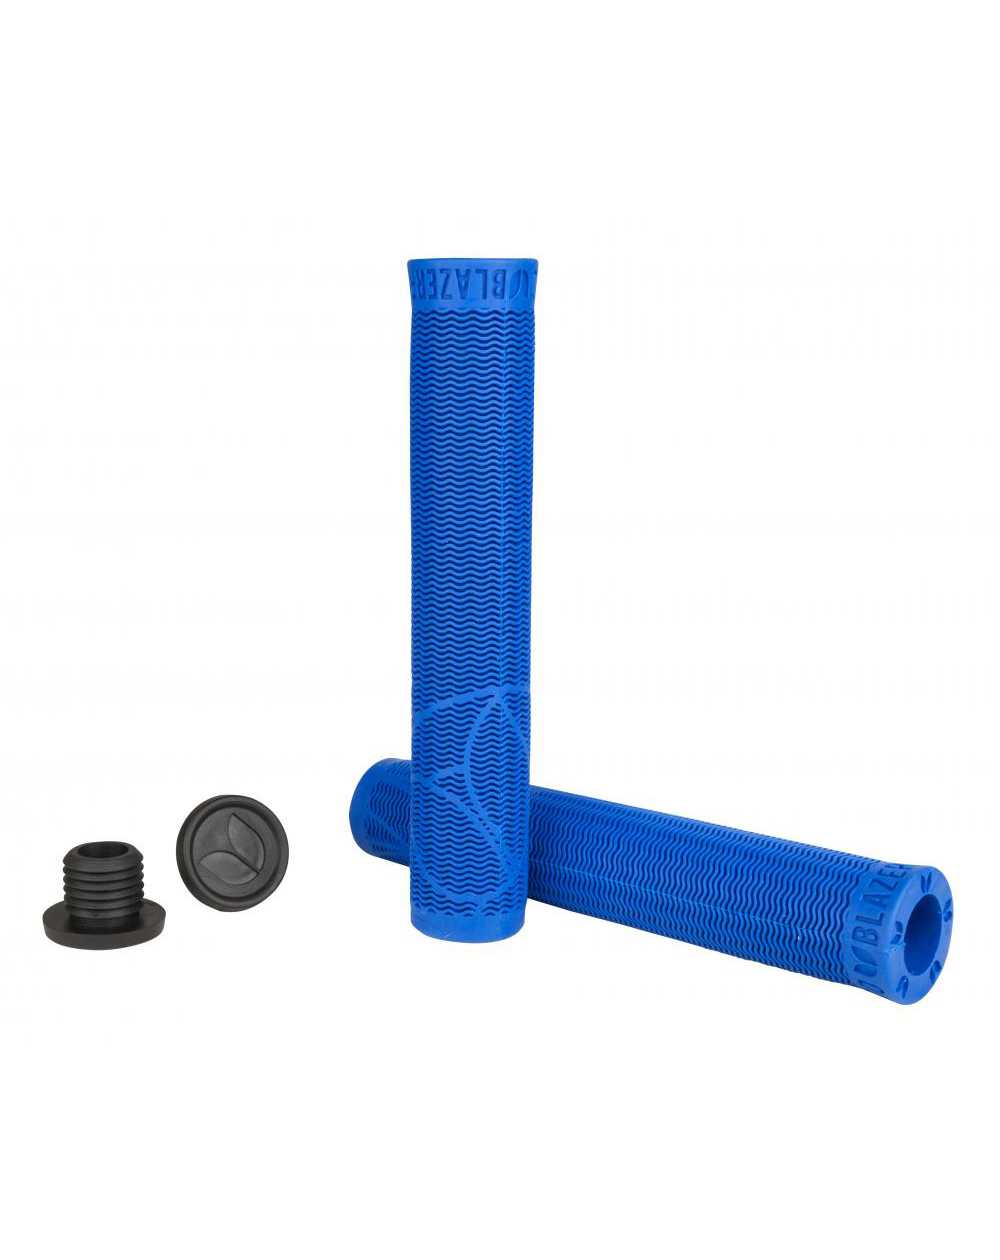 Blazer Pro Calibre Scooter Grips Blue pack of 2